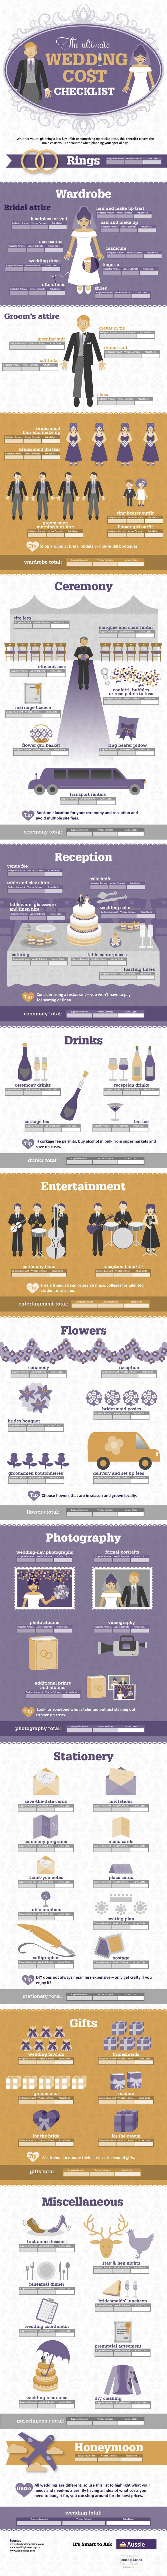 The Ultimate Wedding Cost Checklist Infographic